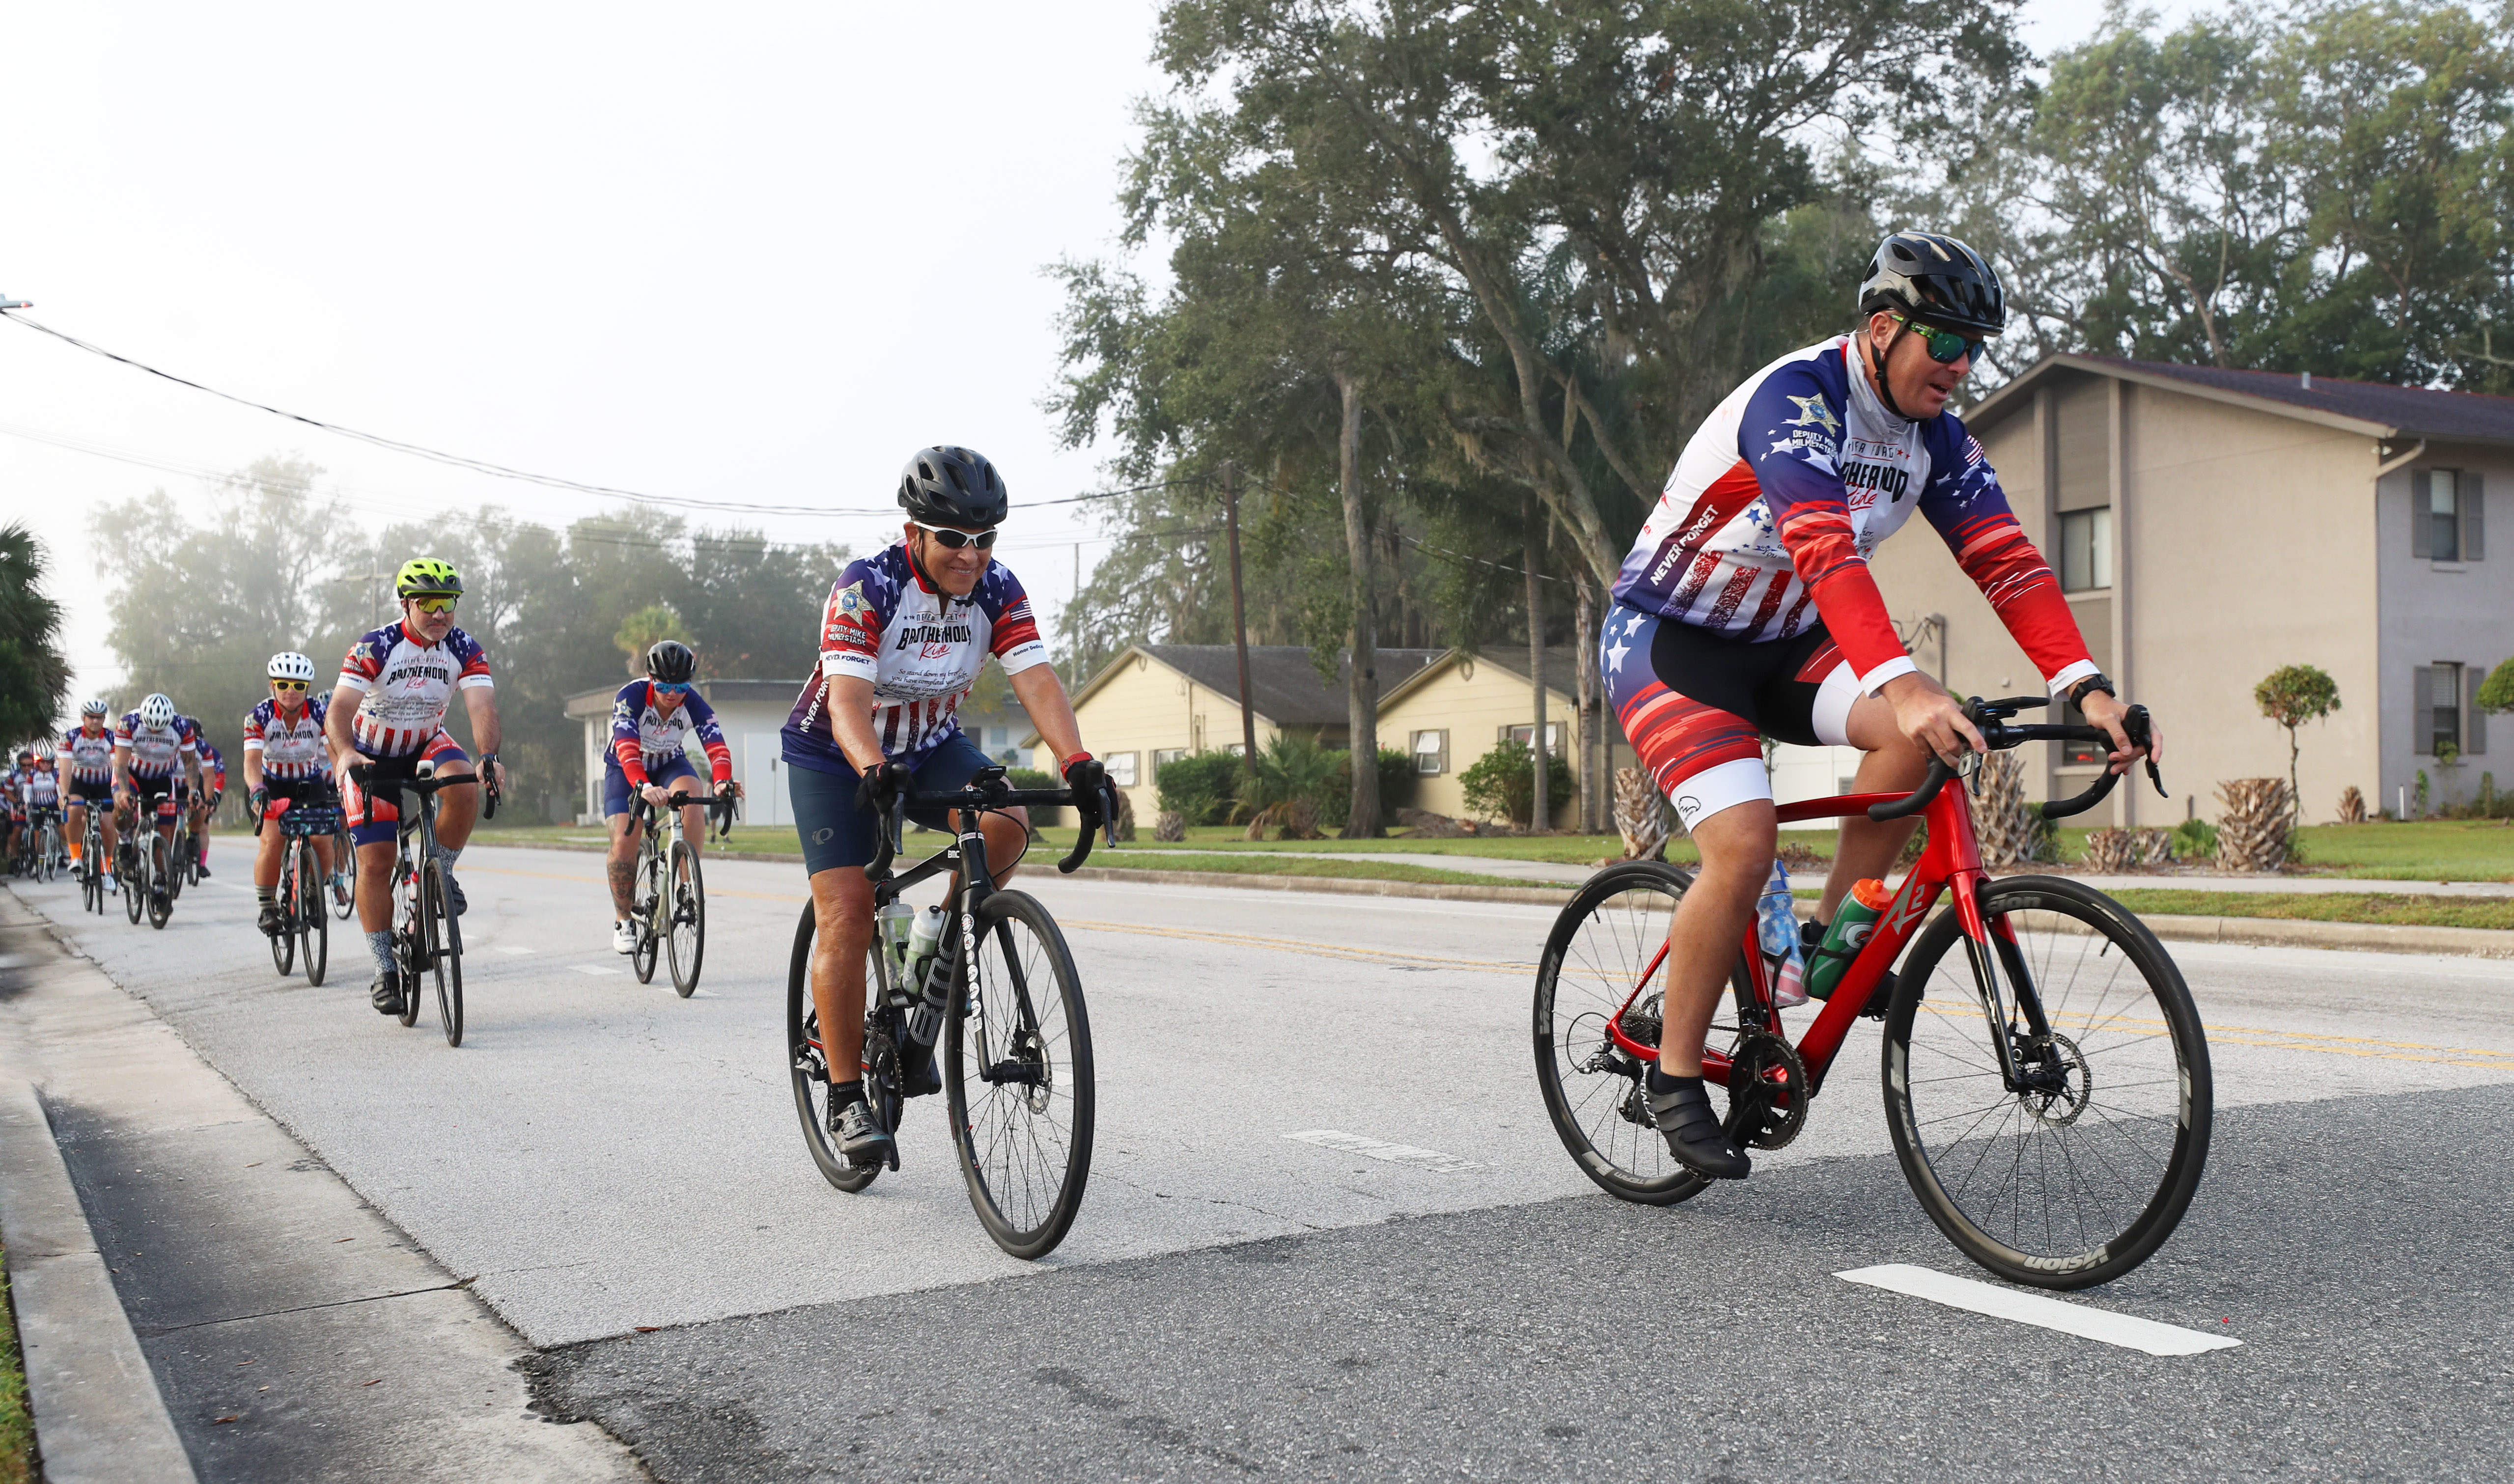 Cyclist participating in the Brotherhood Ride depart Elks Lodge 1079, on their way to Cocoa Beach, on Tuesday, October 31, 2023. The ride is dedicated to the 28 Florida Fallen First Responders who died in the line of duty in 2022 while protecting their communities. They started in Naples and will end their 9-day ride through Florida in Miami.(Ricardo Ramirez Buxeda/ Orlando Sentinel)